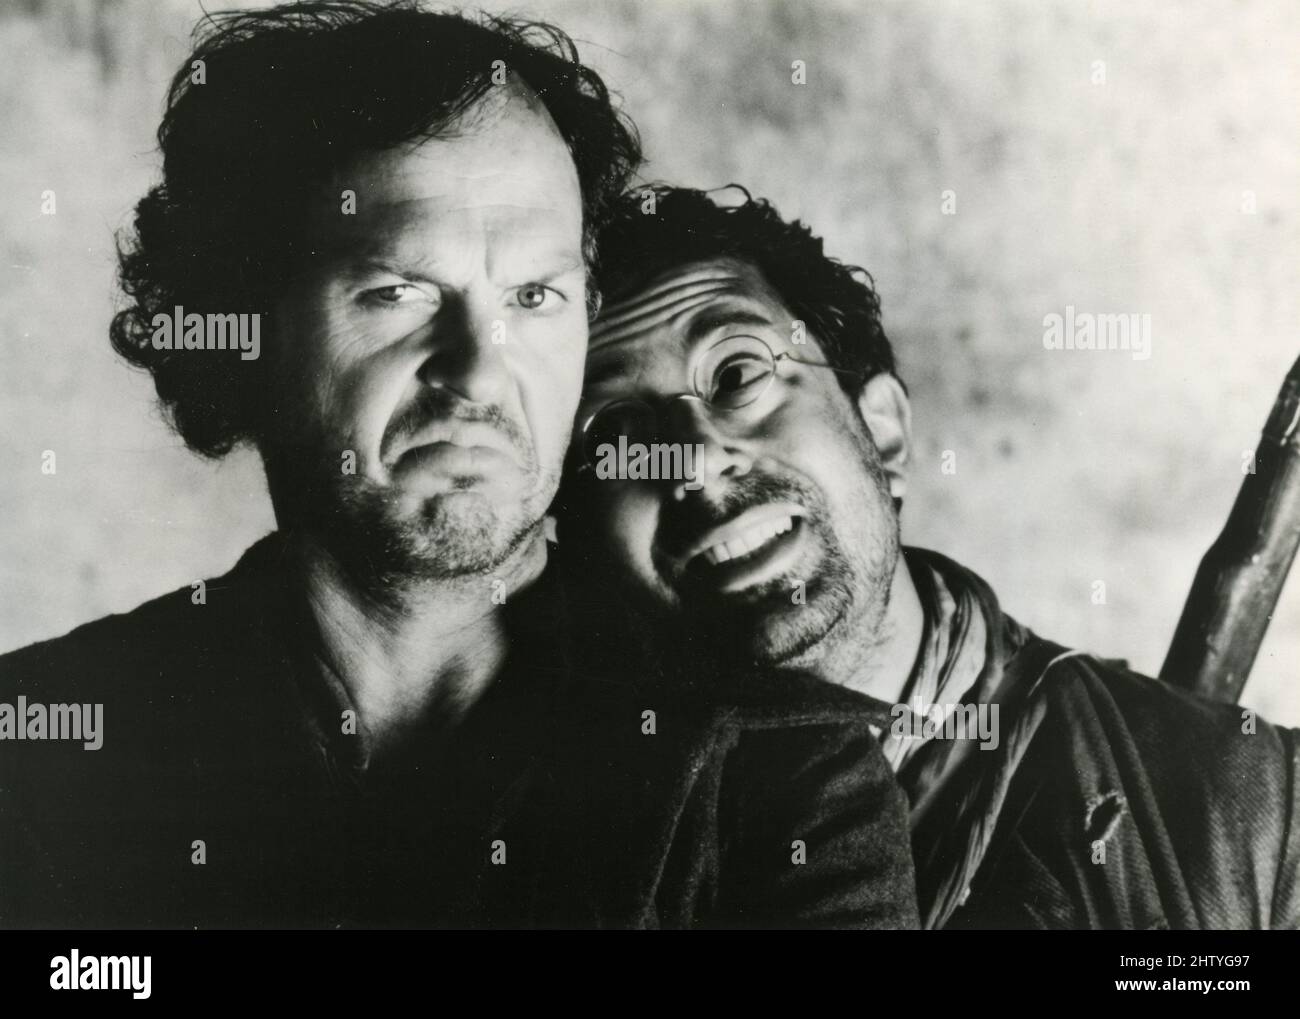 Actors Michael Keaton and Ben Elton in the movie Much Ado About Nothing, Italy 1993 Stock Photo